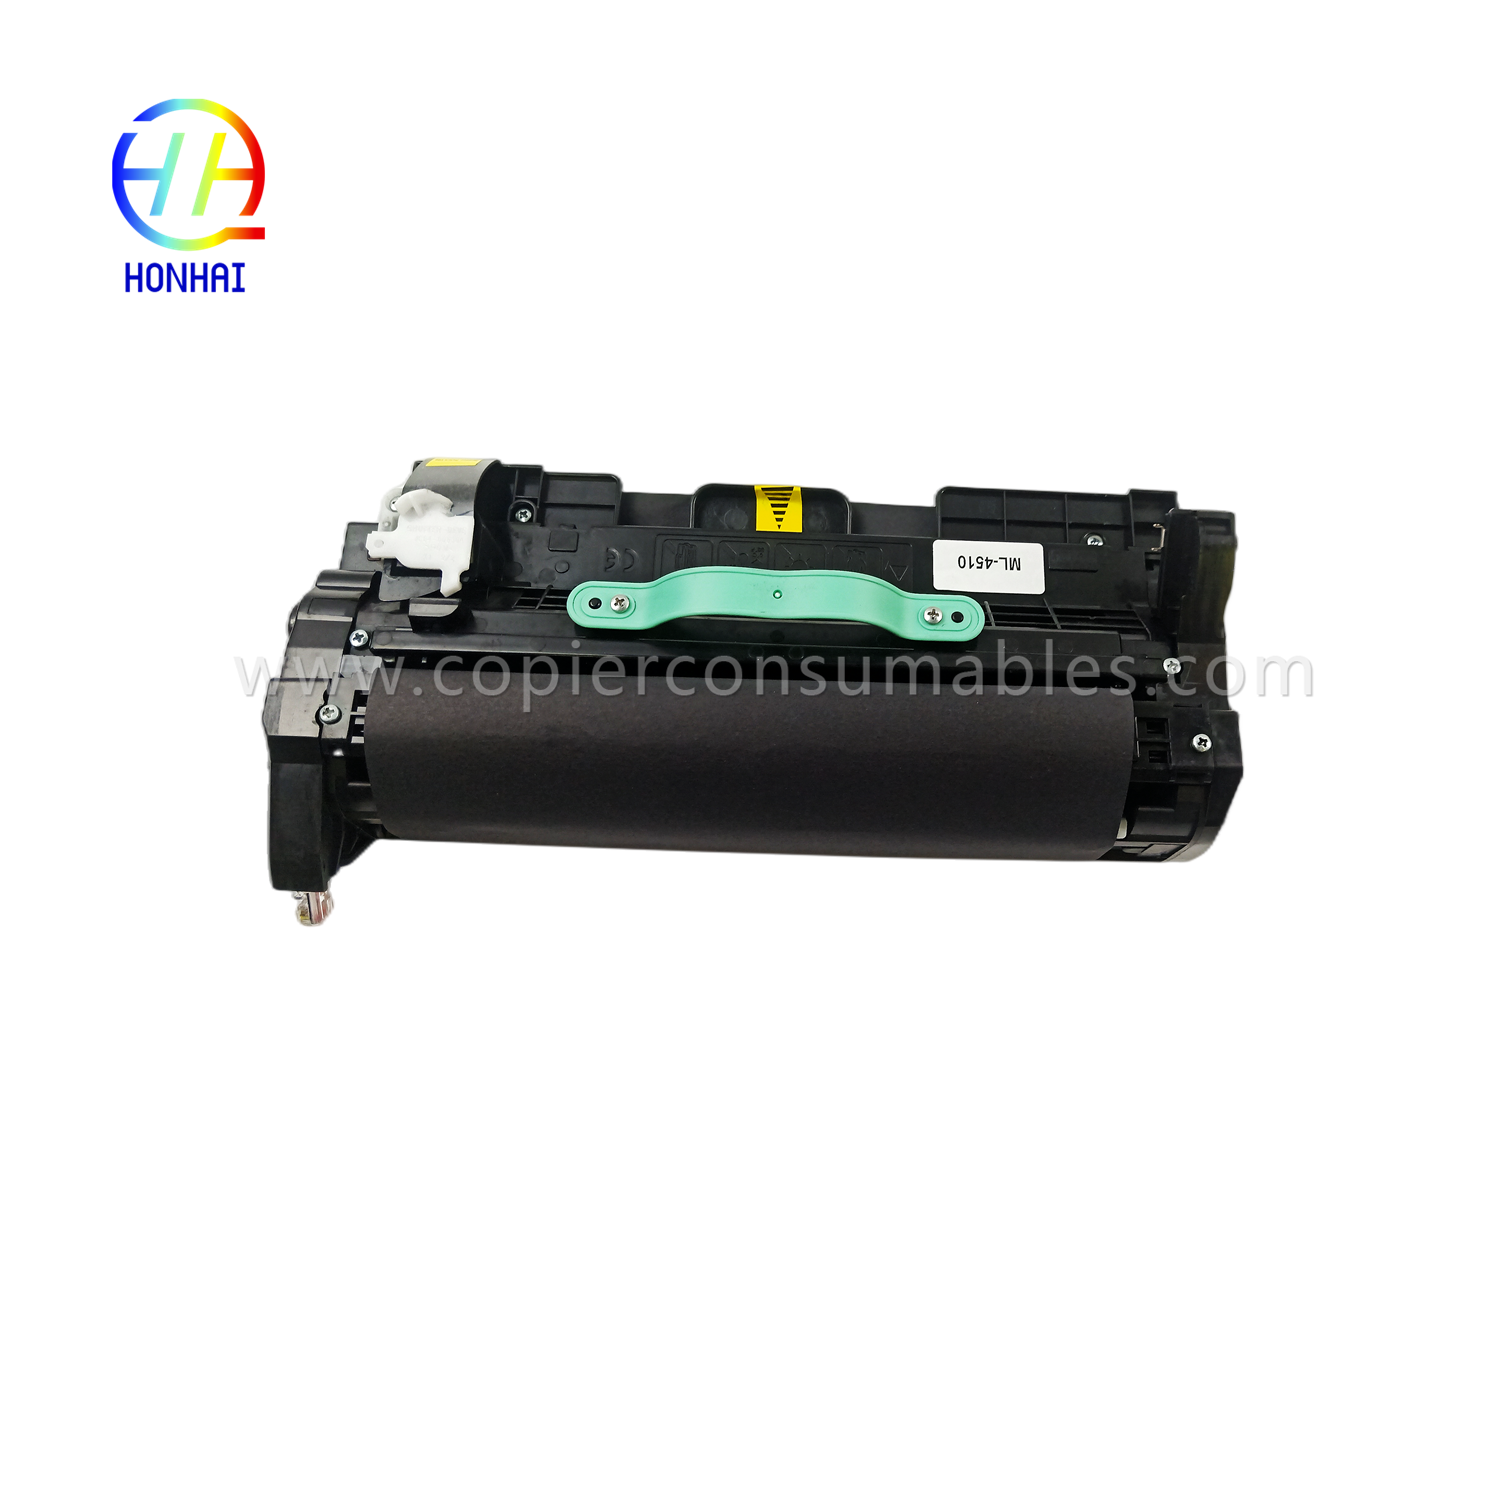 https://www.copierconsumables.com/fuser-unit-for-samsung-ml-4510-ml4512-ml-4510nd-ml-4512nd-ml-4510-ml-4512-jc91-01028a-fusing-assembly-2-product/